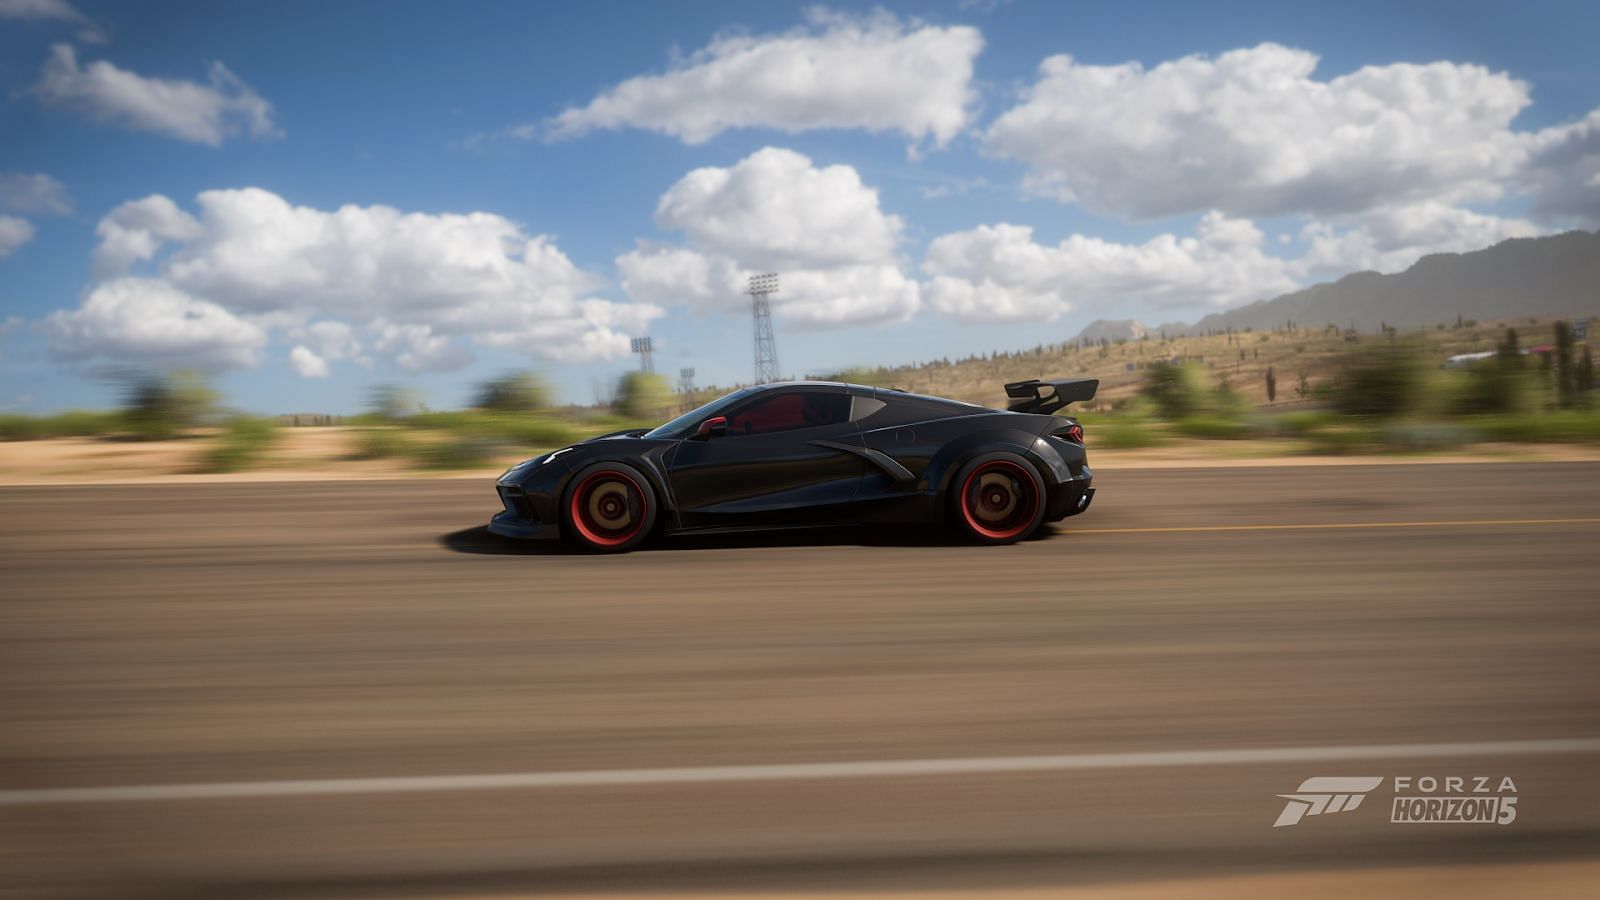 Going fast is the true way of feeling roads (Screengrab from Forza Horizon 5)